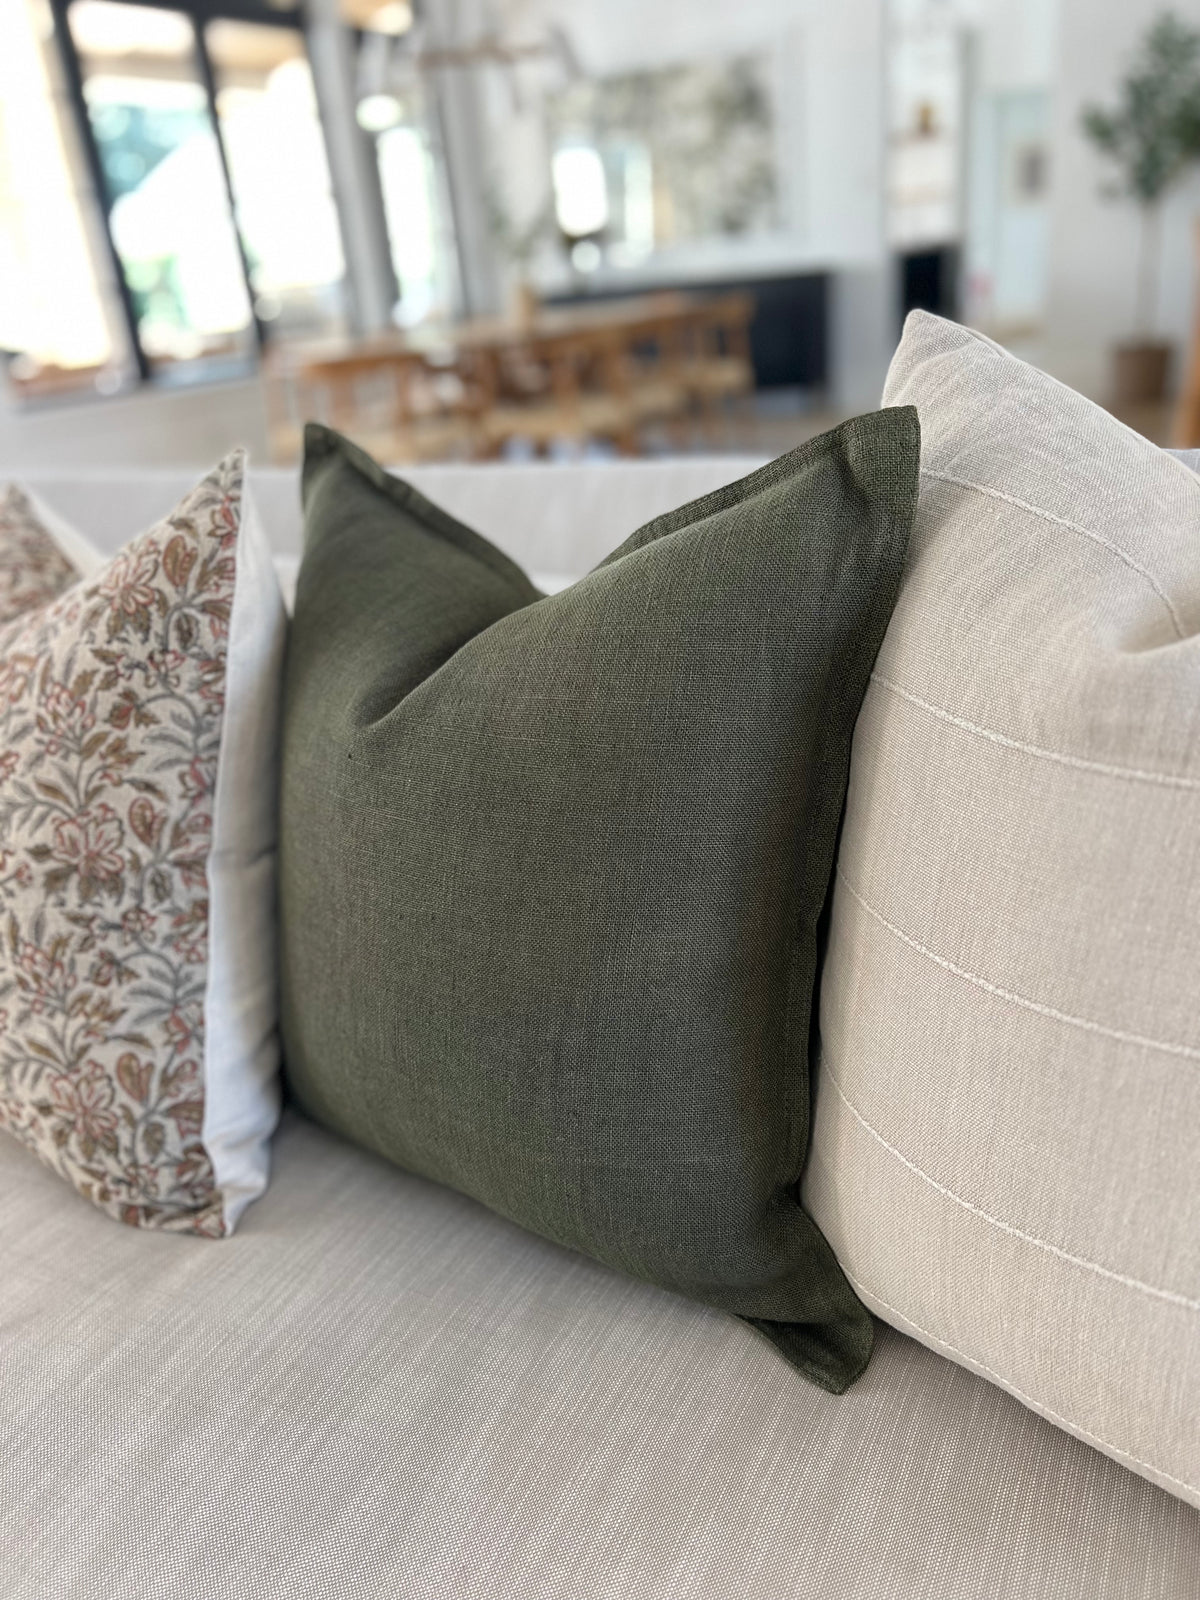 Olive linen pillow on a sand colored sofa.